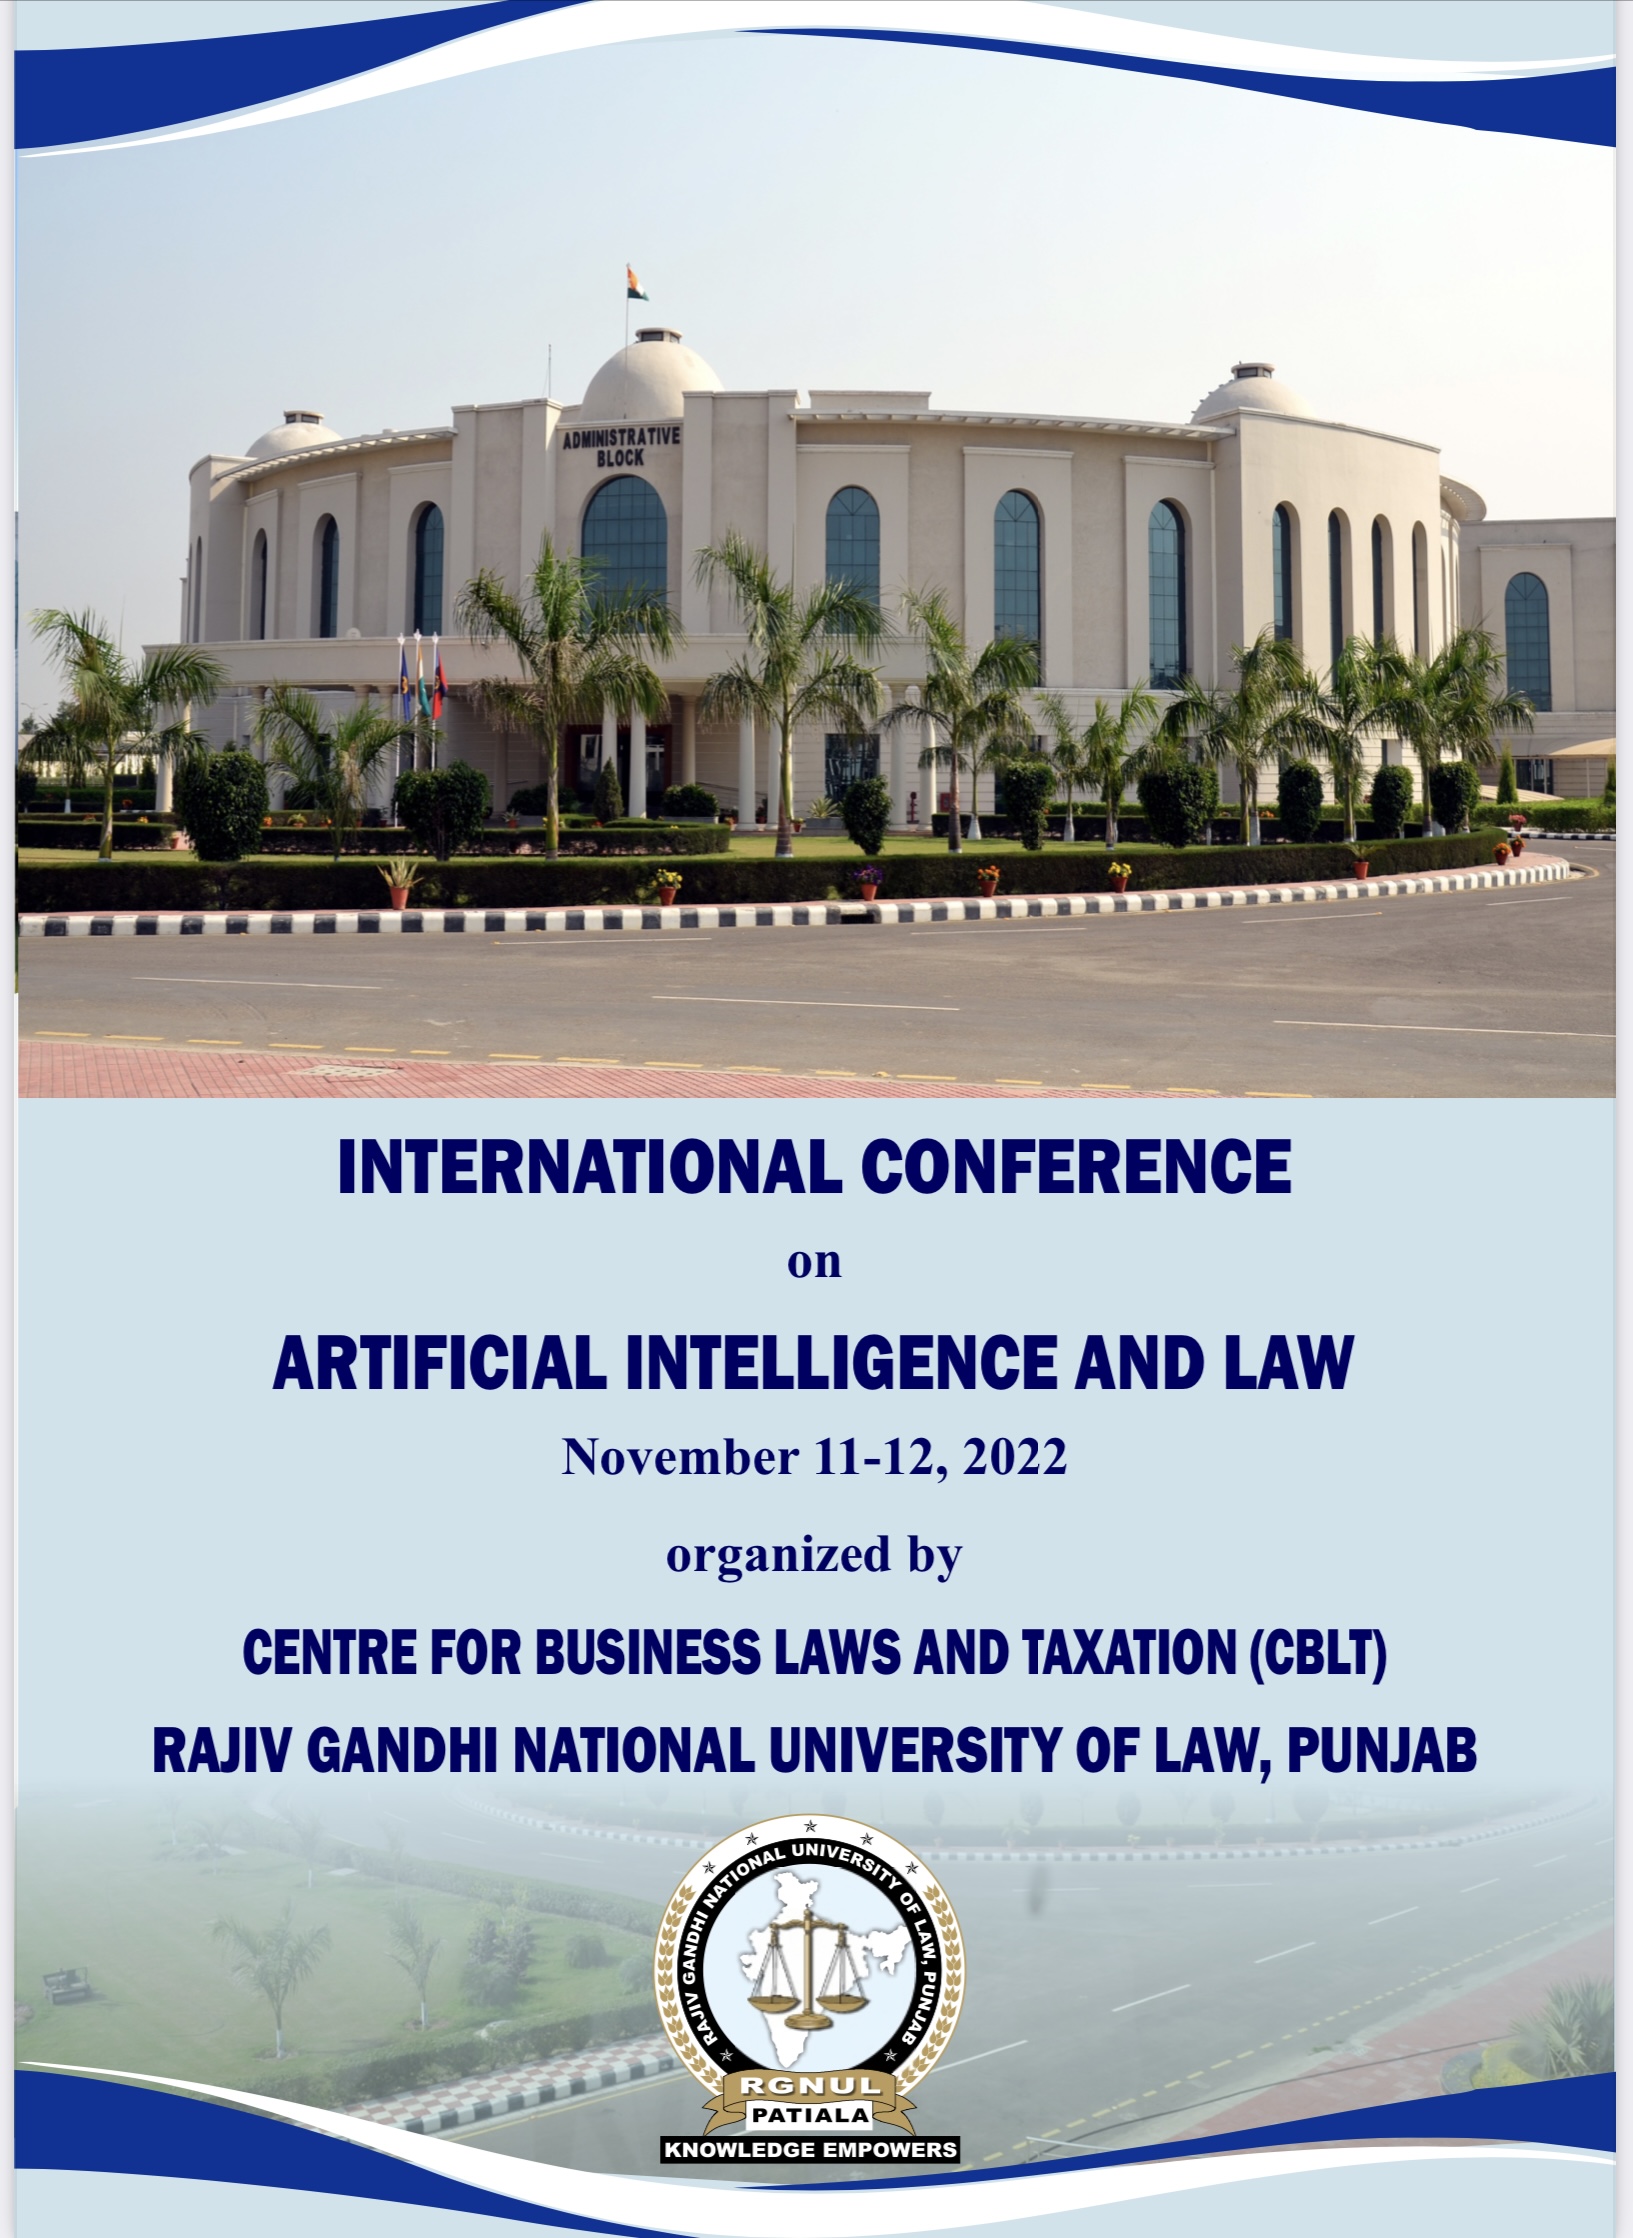 Centre for Business Law and Taxation is organising an International Conference on Artificial Intelligence and Law